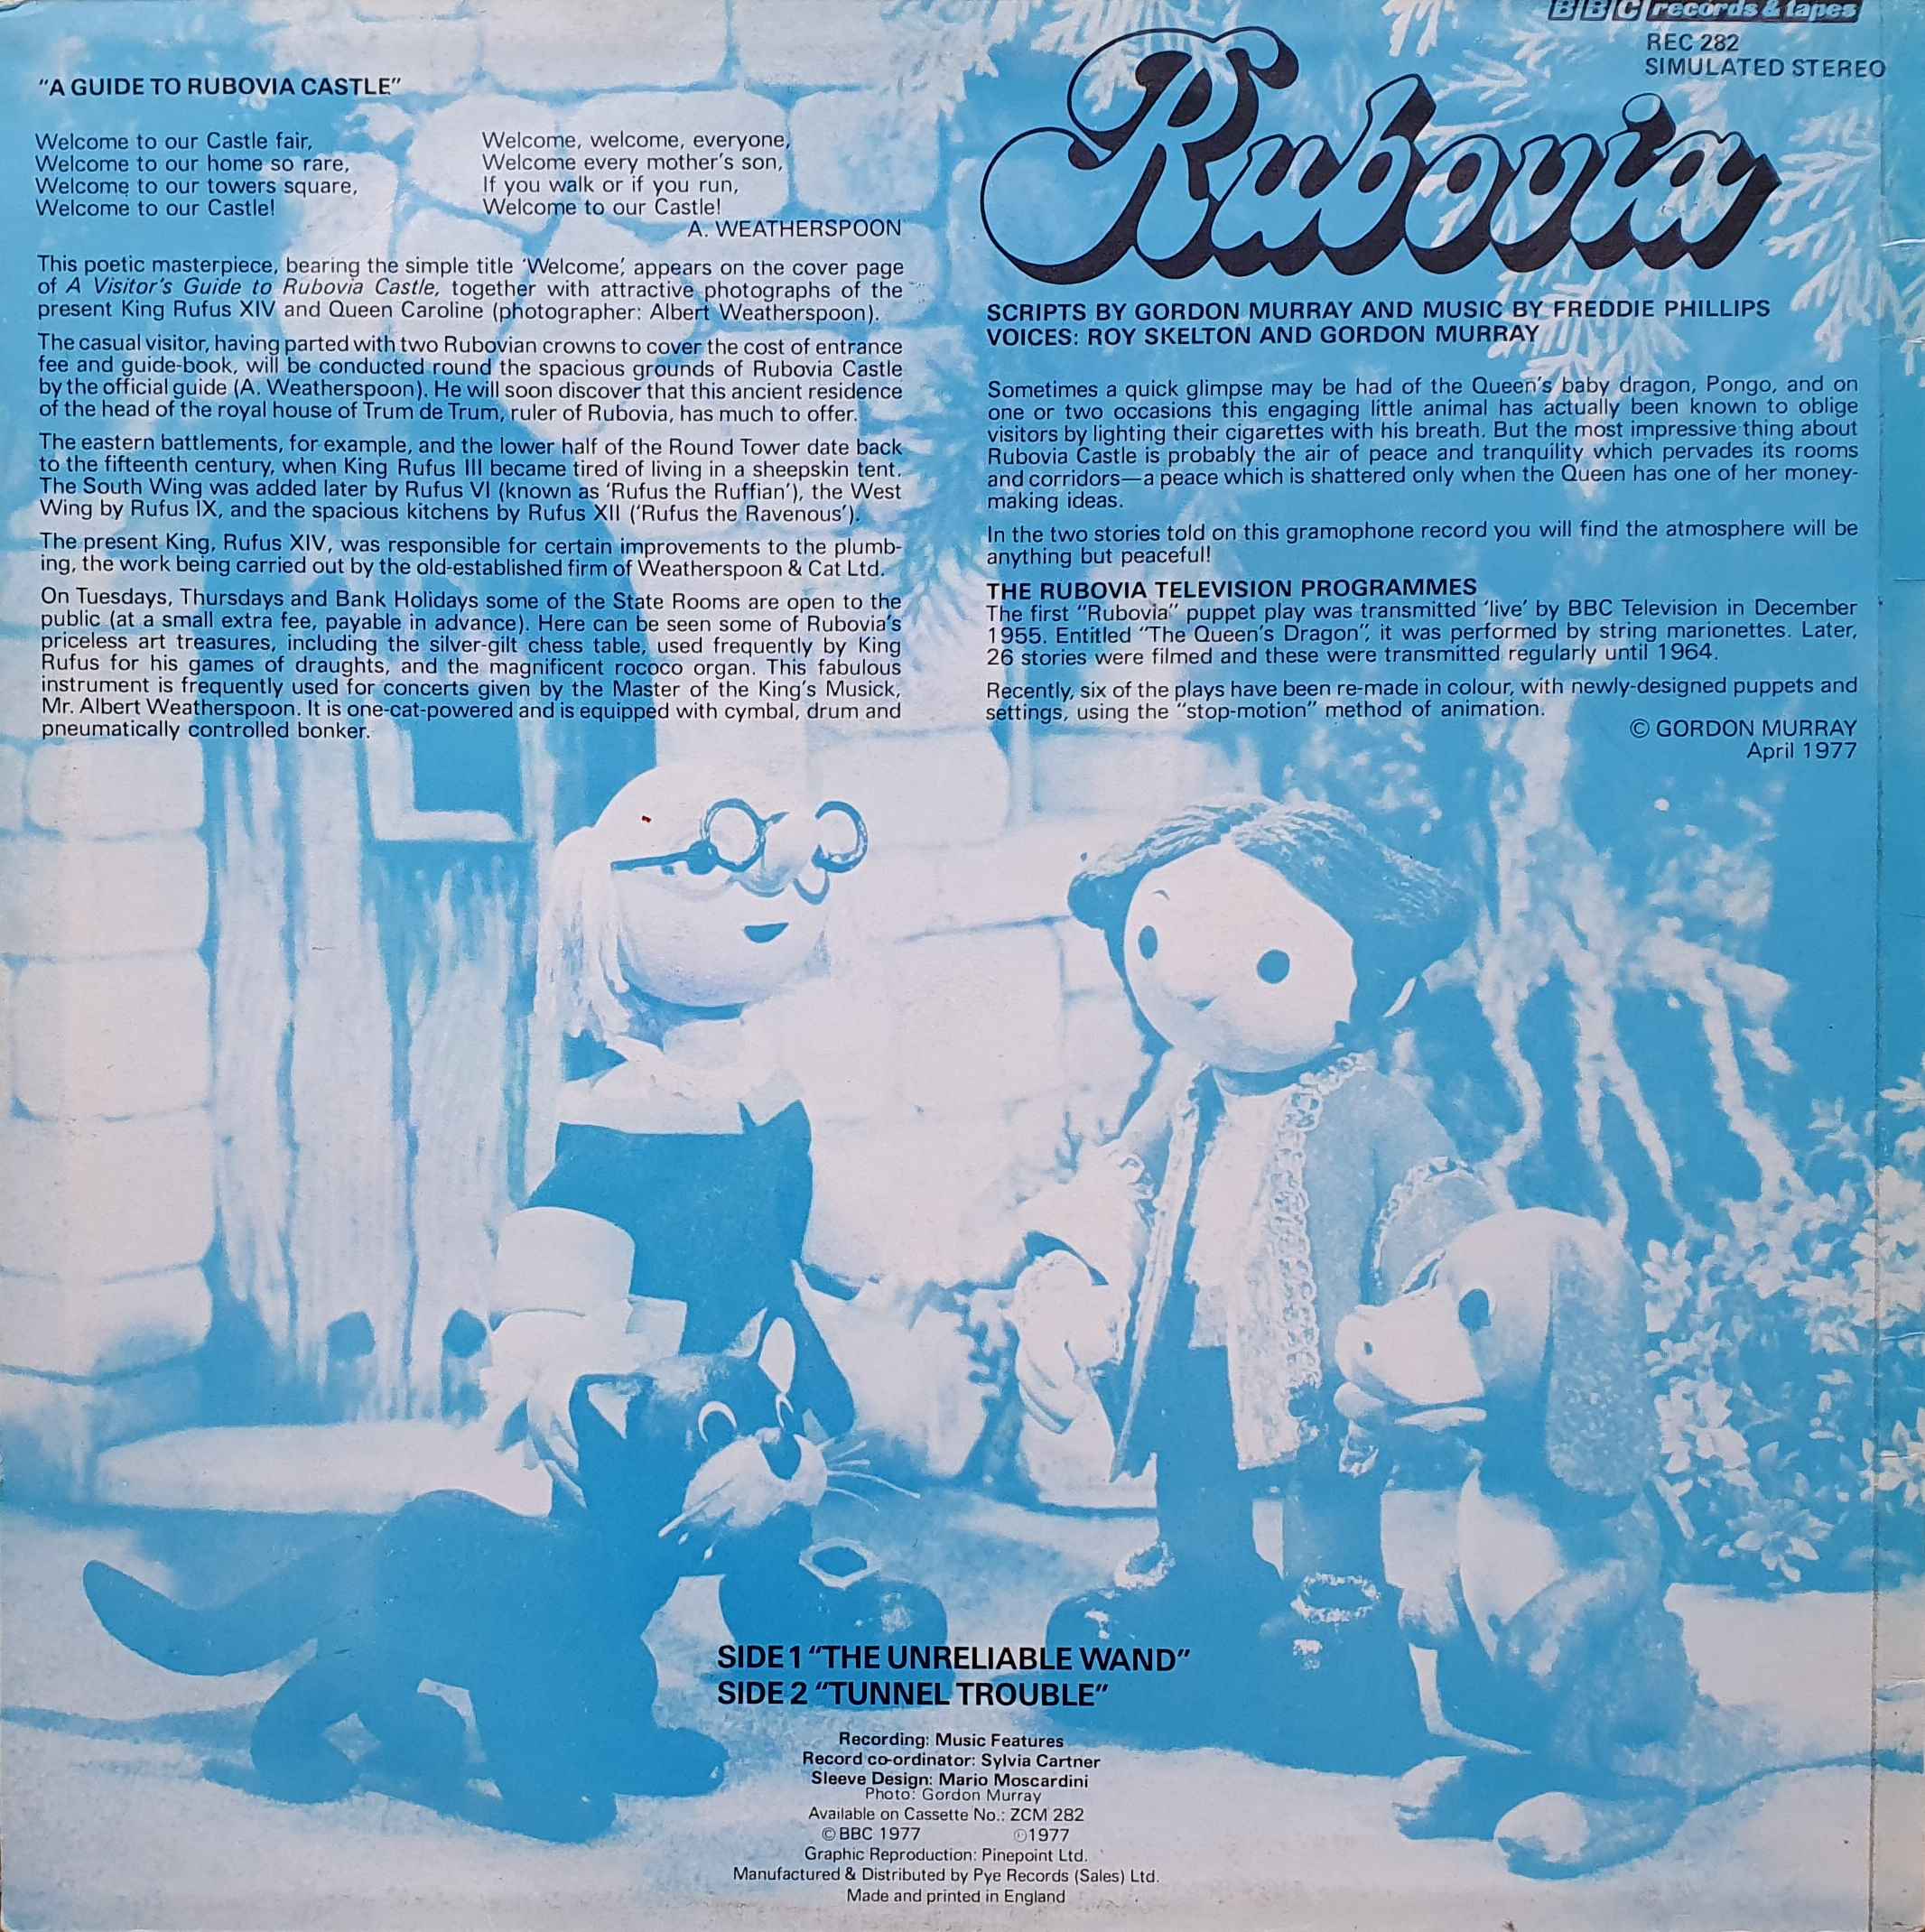 Picture of REC 282 Rubovia by artist Gordon Murray from the BBC records and Tapes library